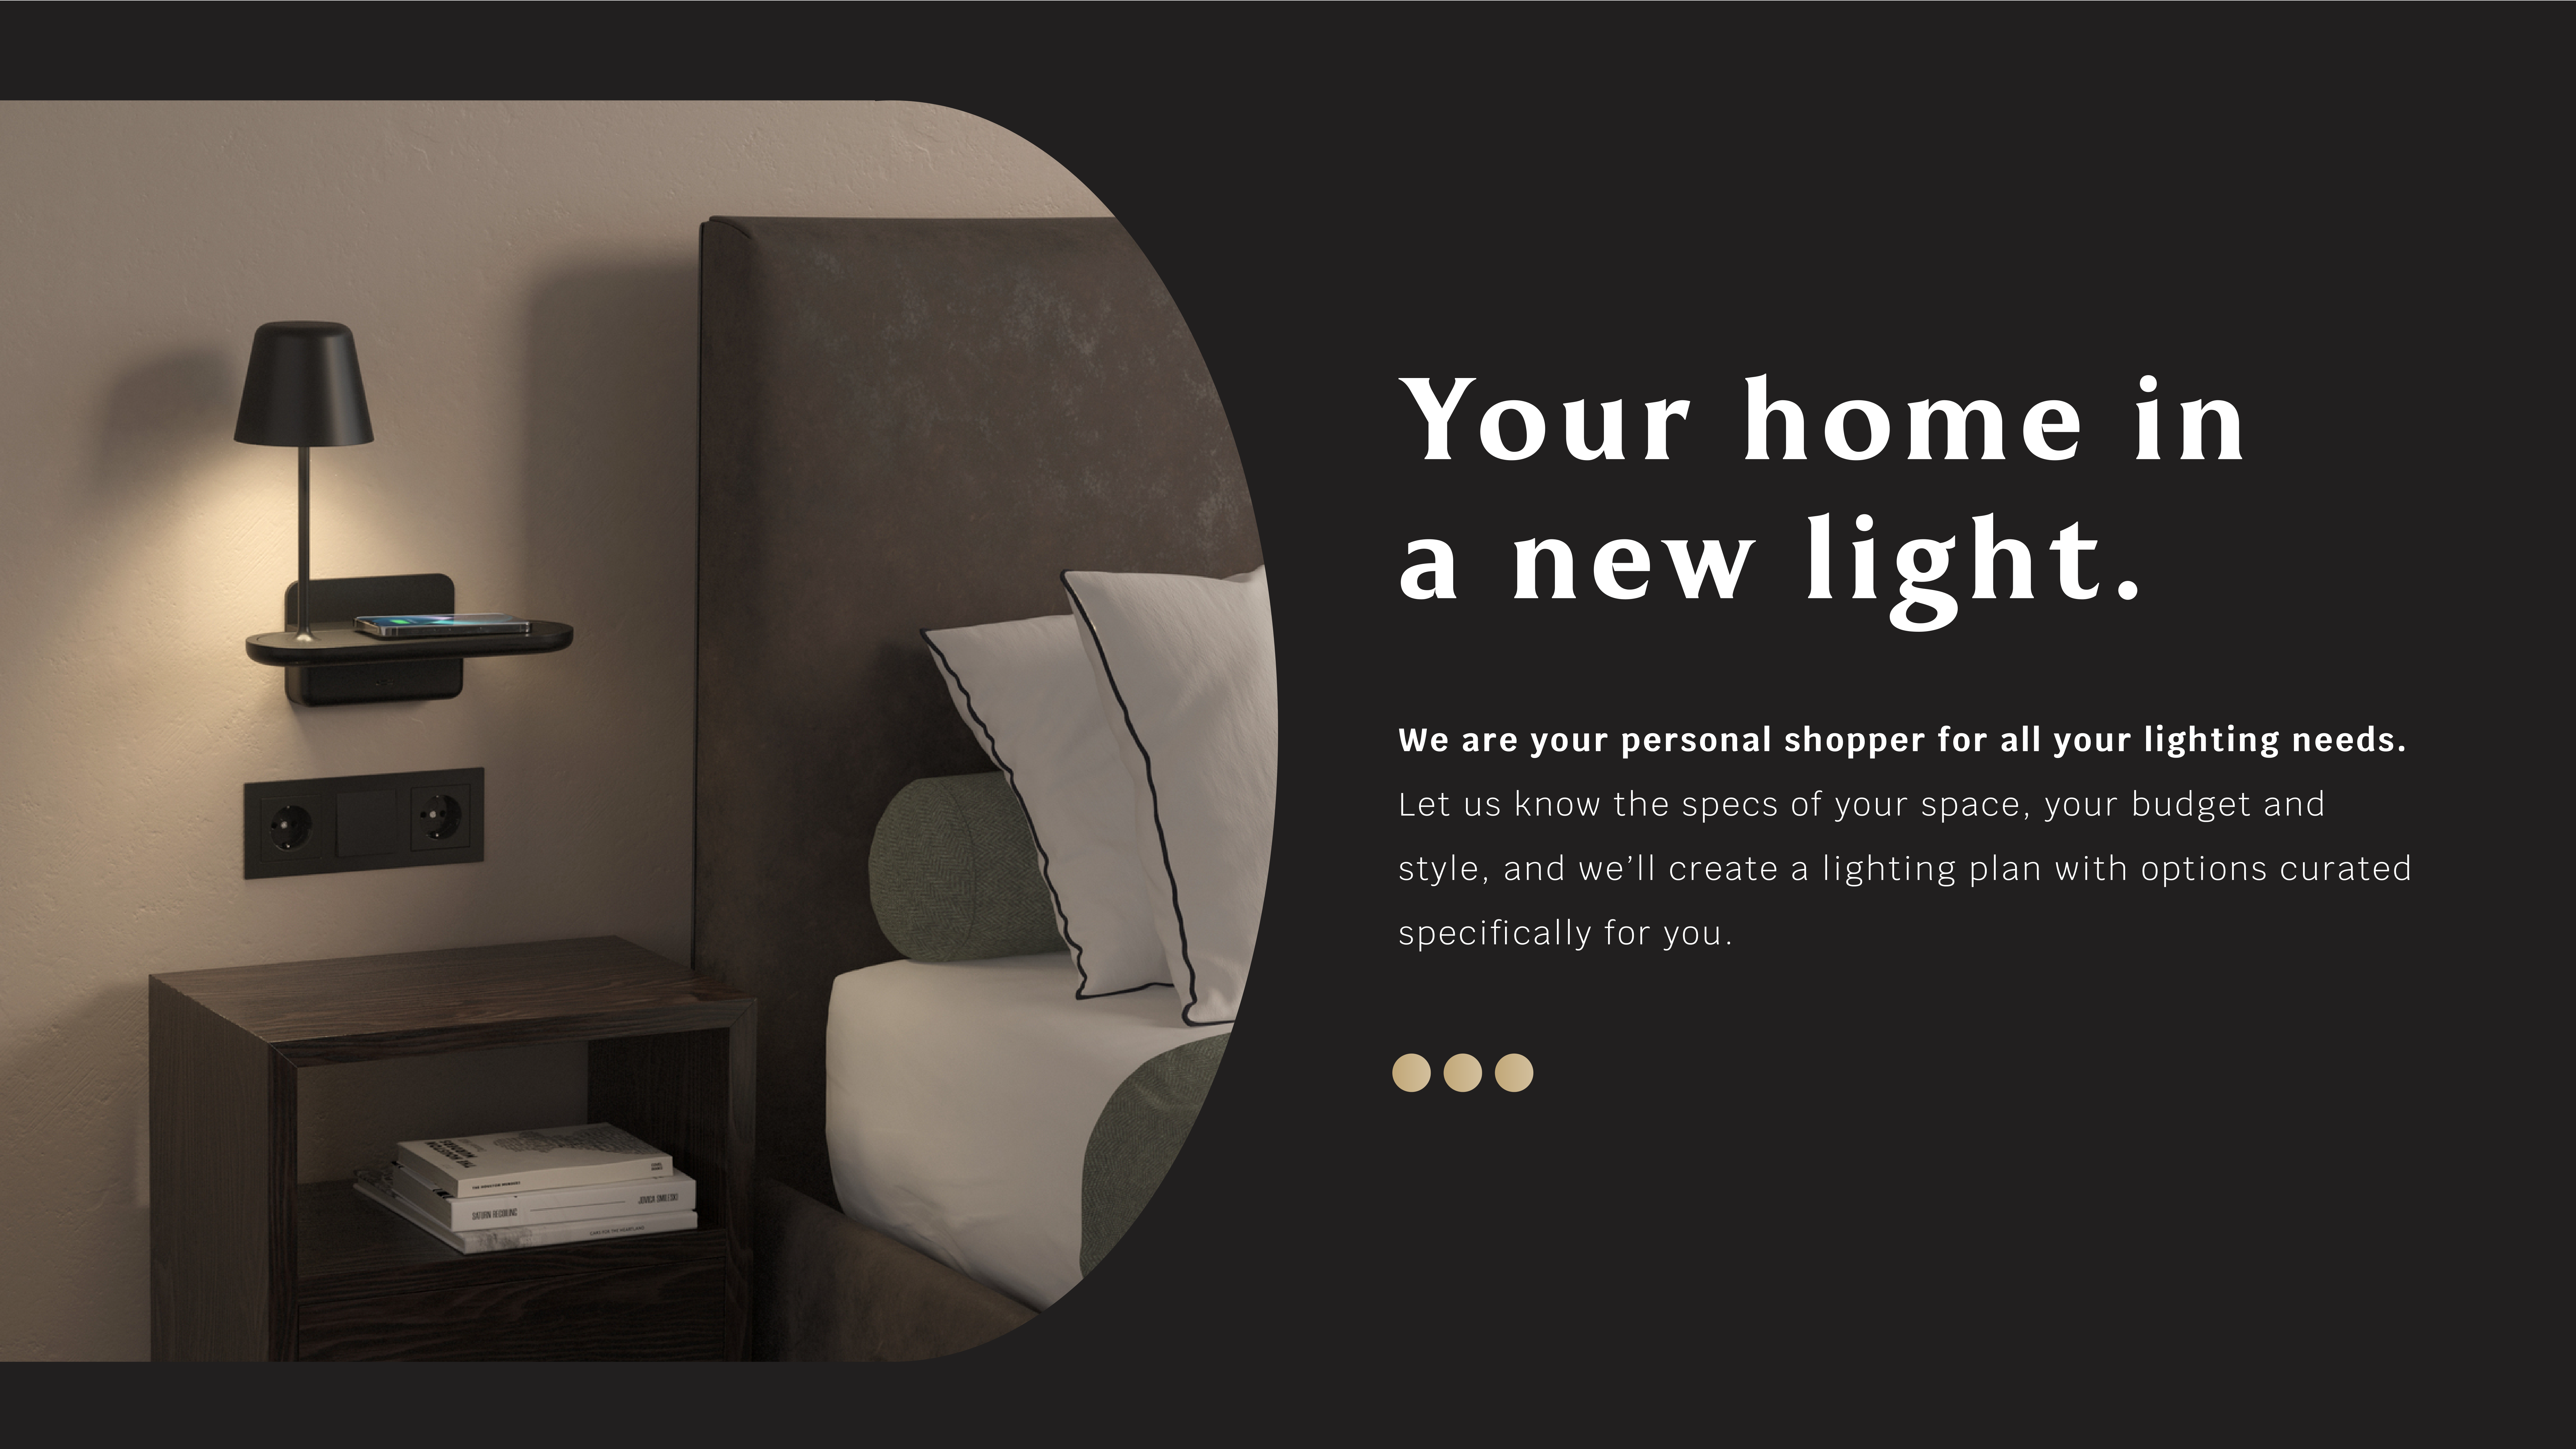 We are your personal shopper for all your lighting needs